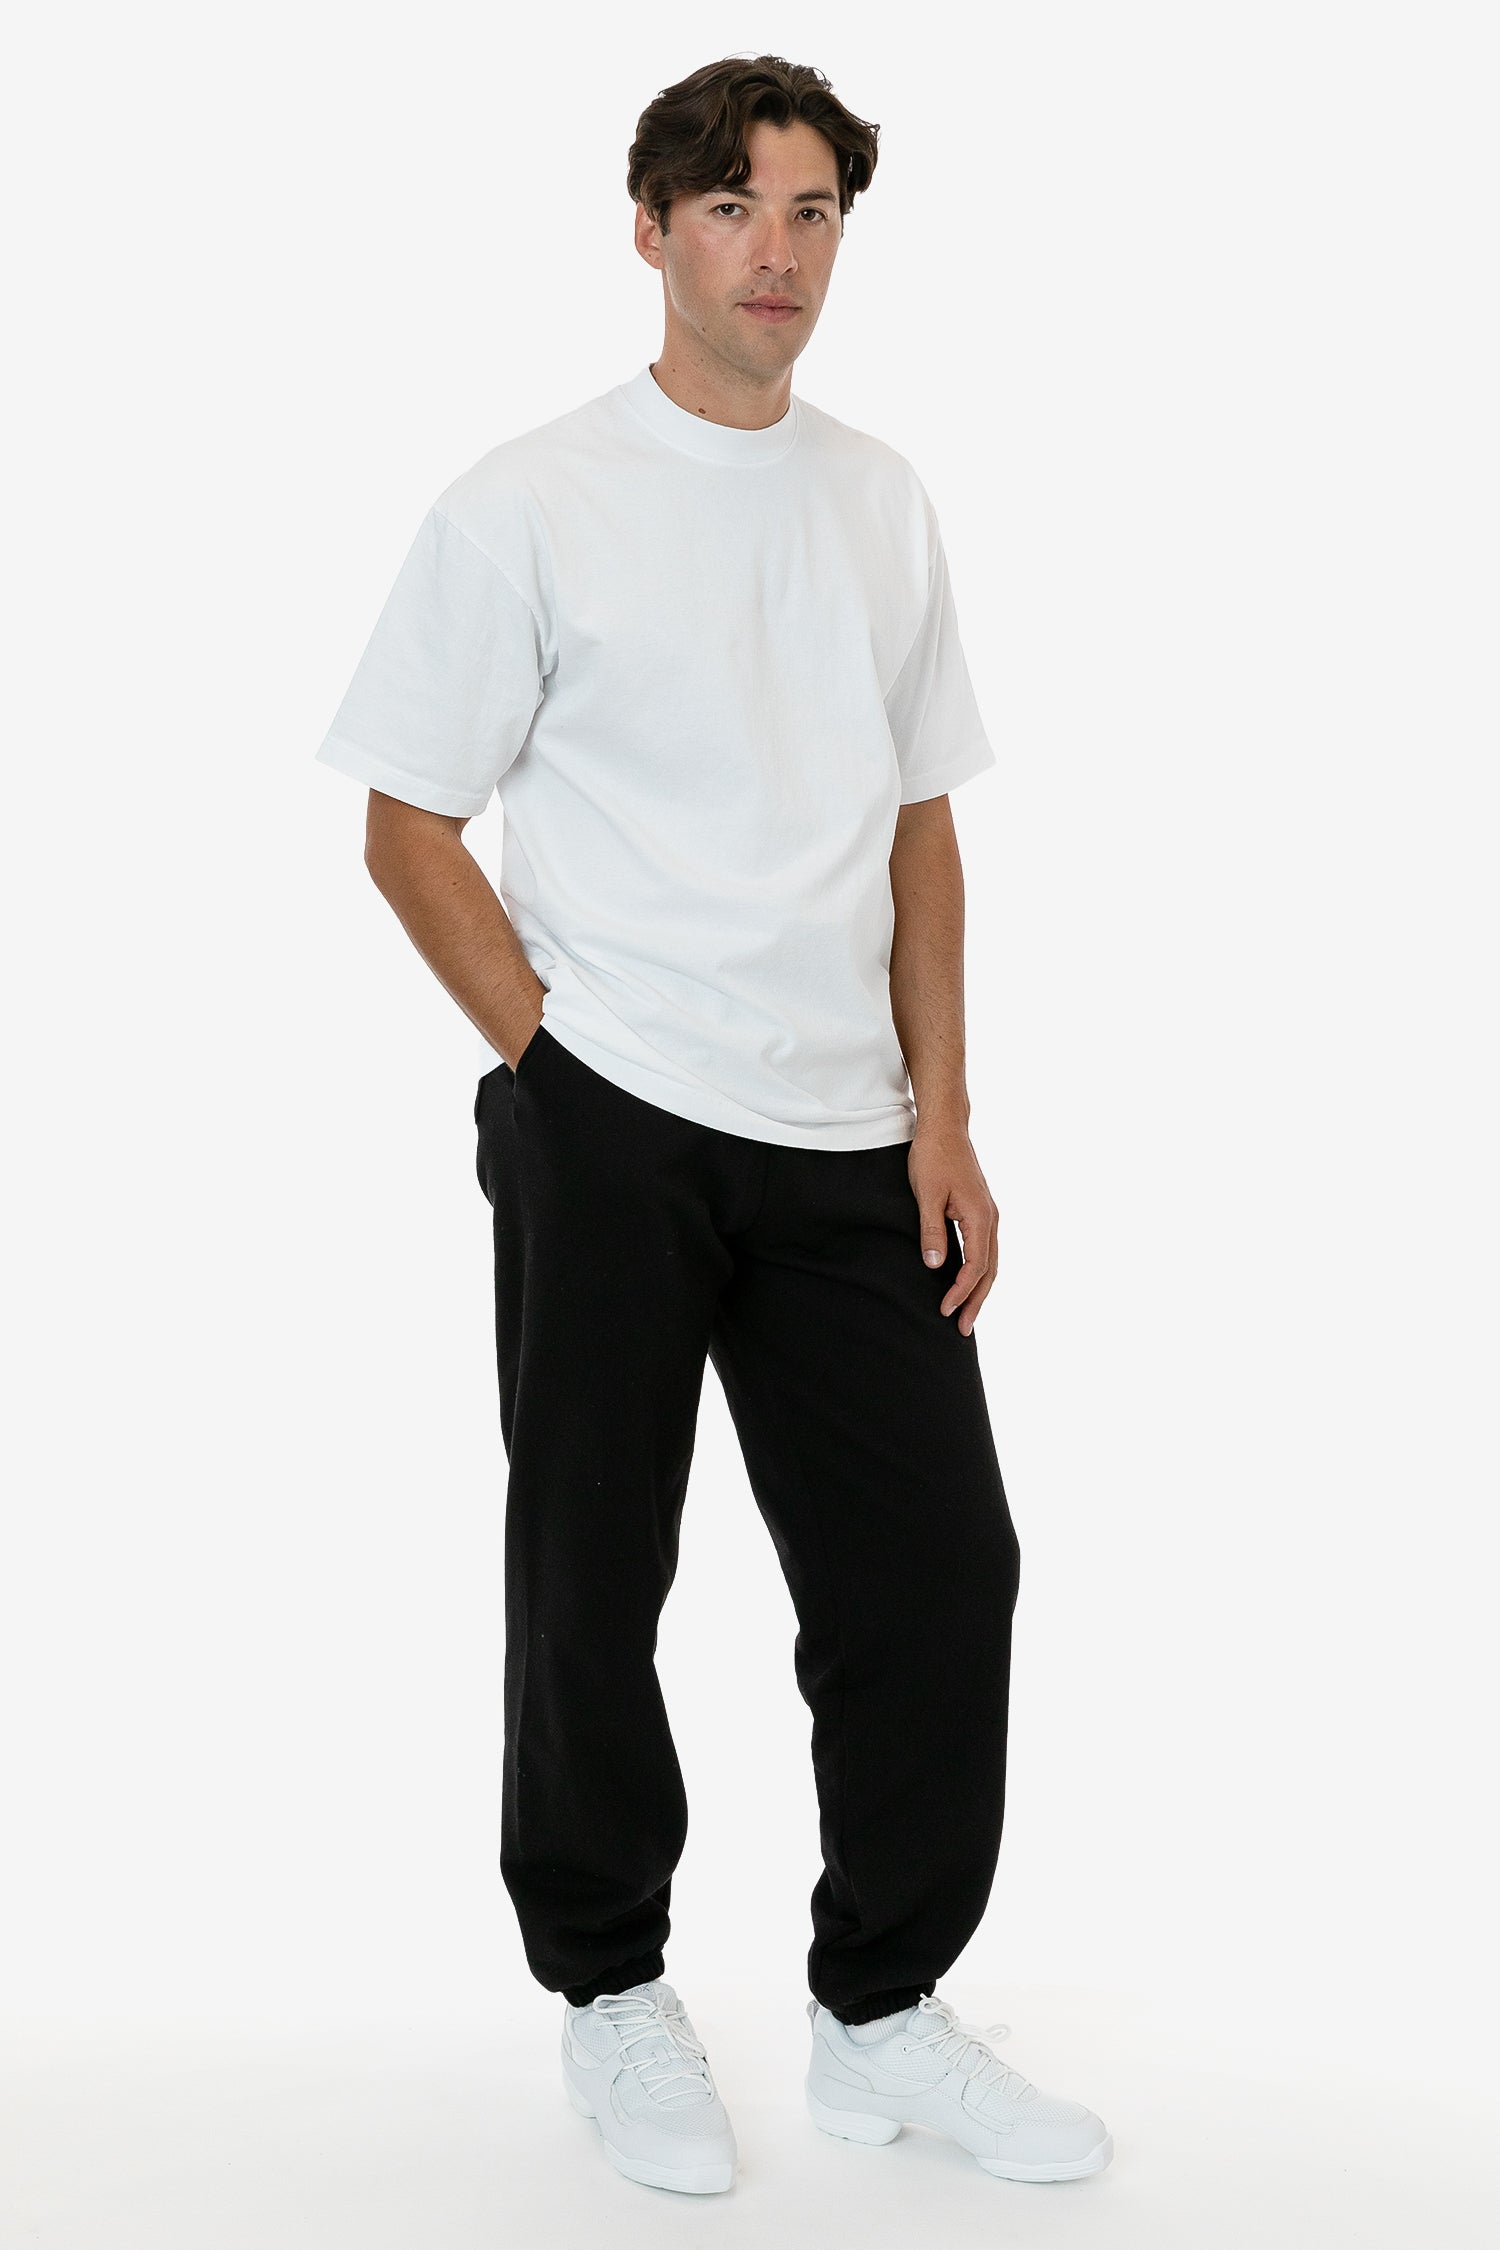 MWF1044 - 10 oz. Mid-Weight Poly Cotton Fleece Wide Sweatpant – Los Angeles  Apparel